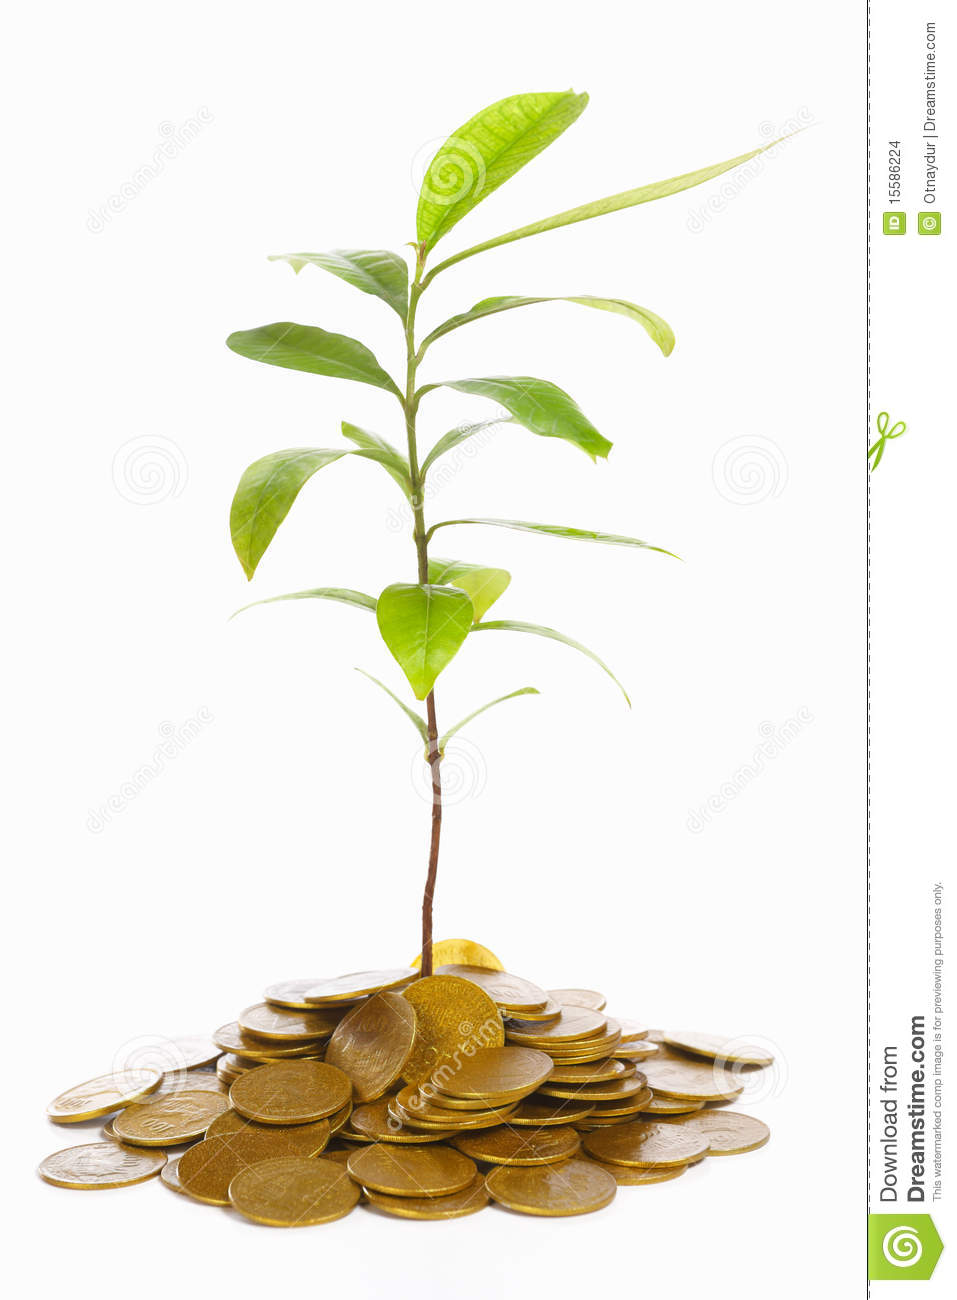 Green Plant Growth Between Gold Coins Isolated On White Background